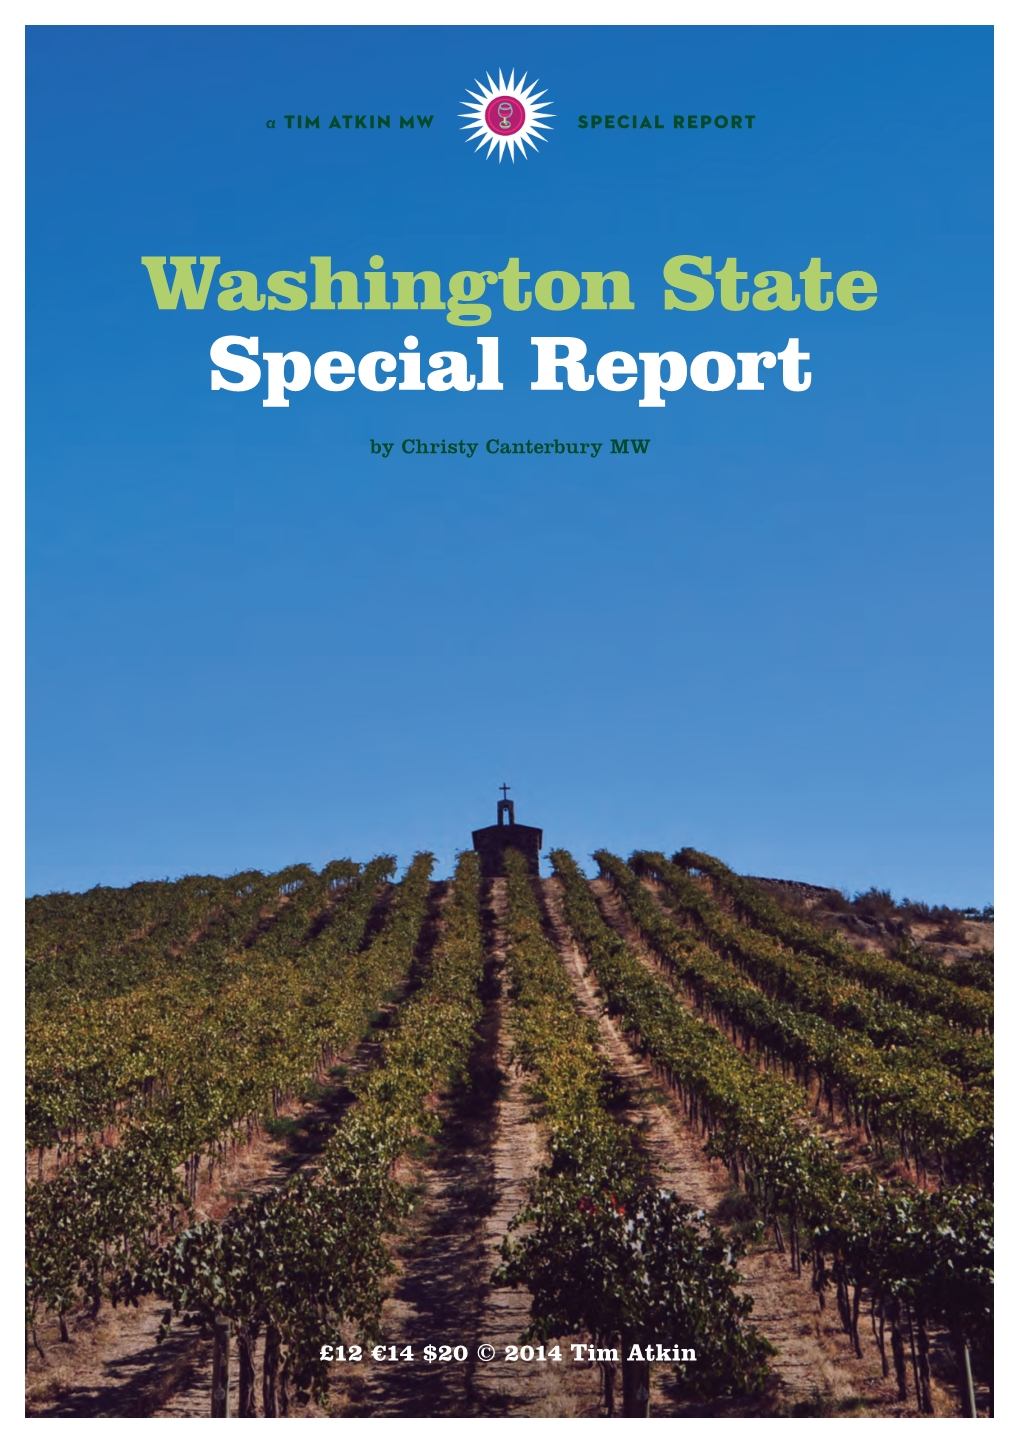 Washington State Special Report